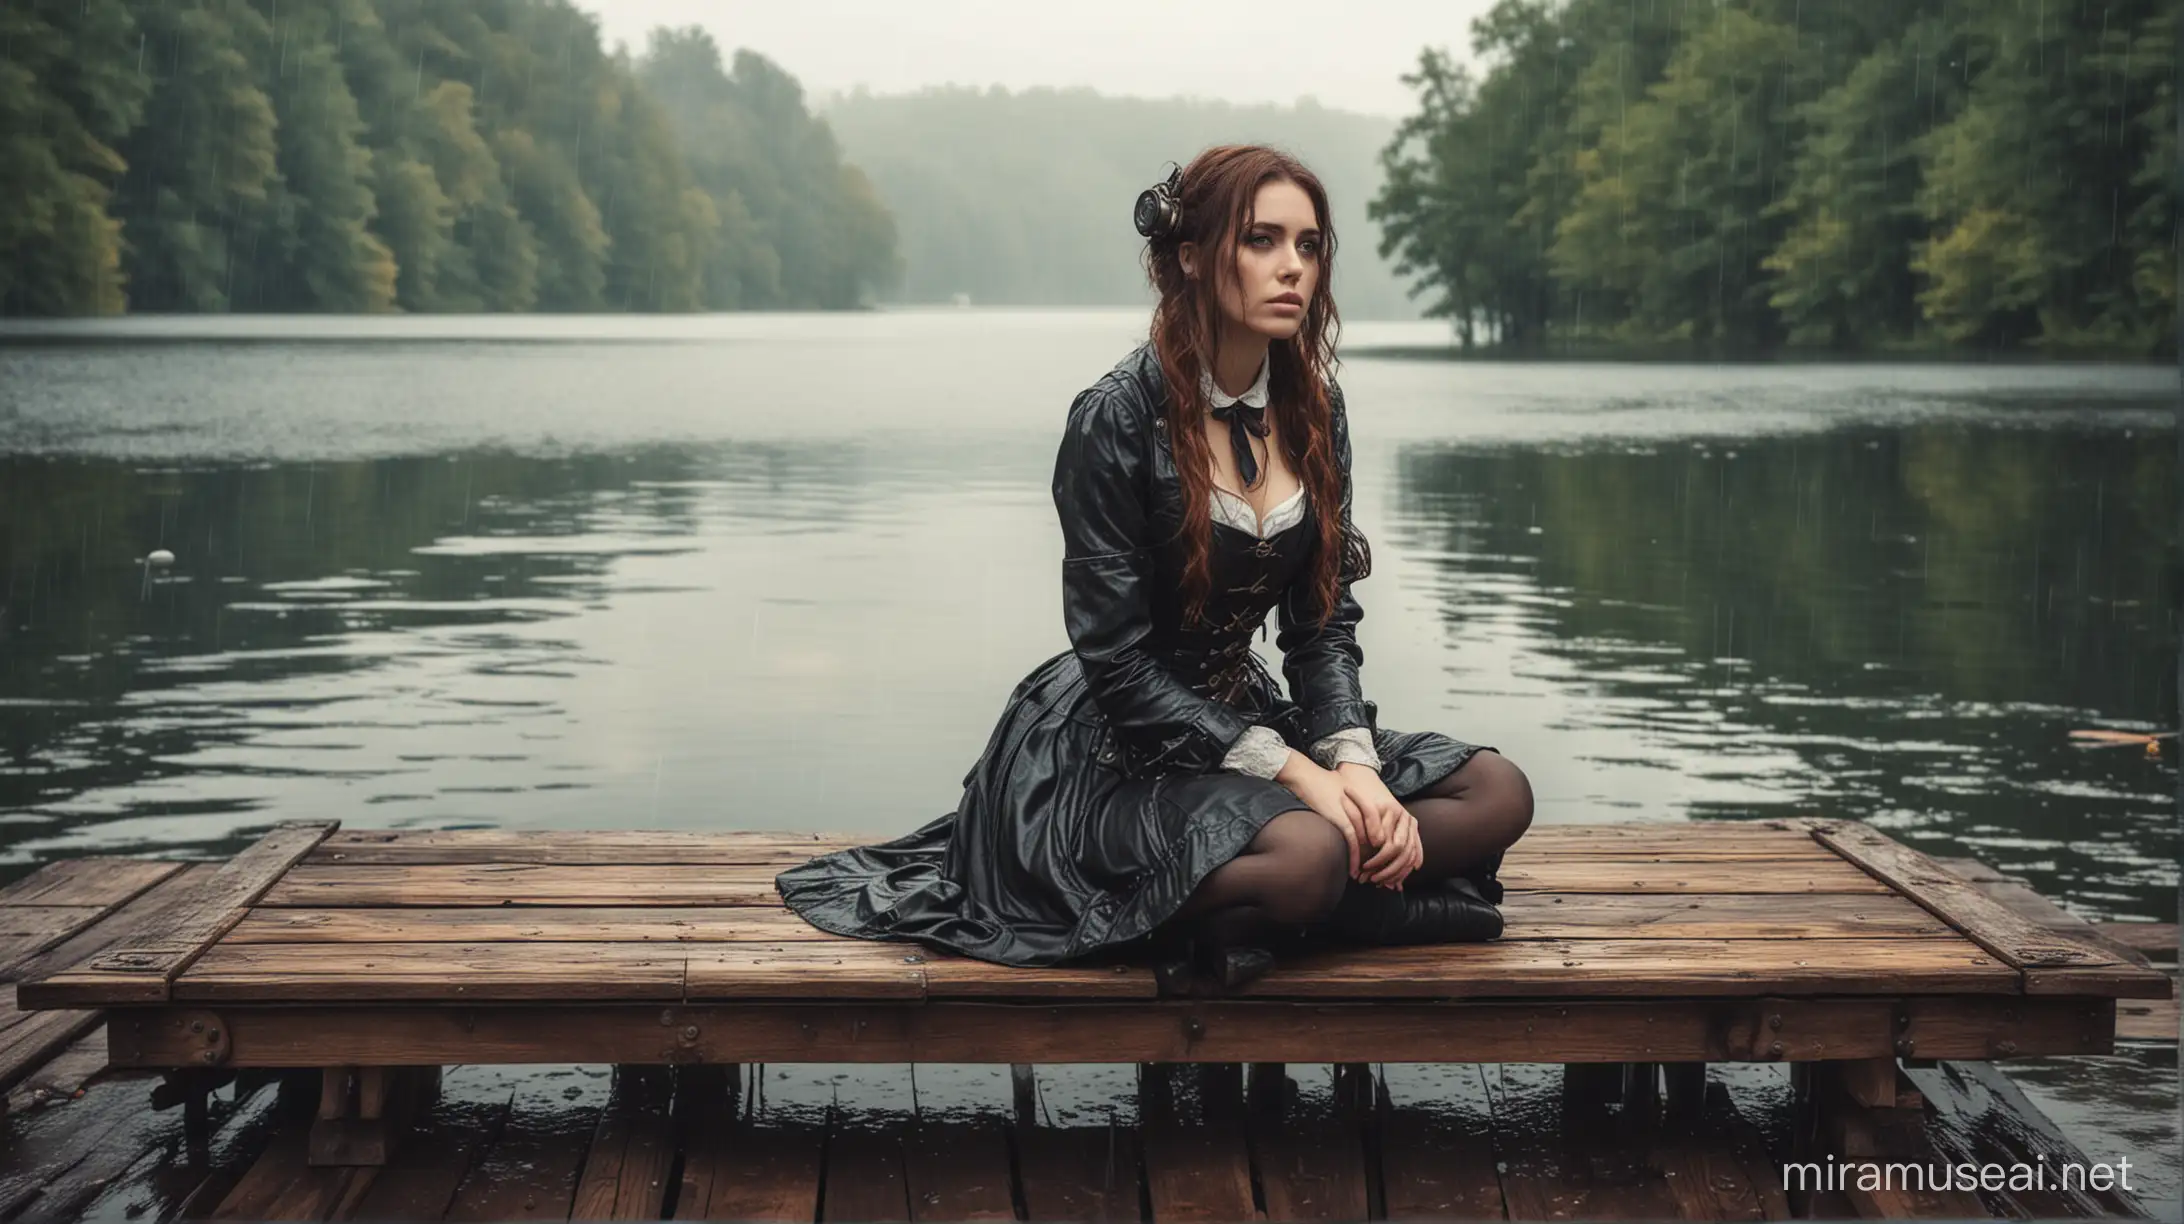 Lonely Steampunk Woman Contemplates by Rainy Lake